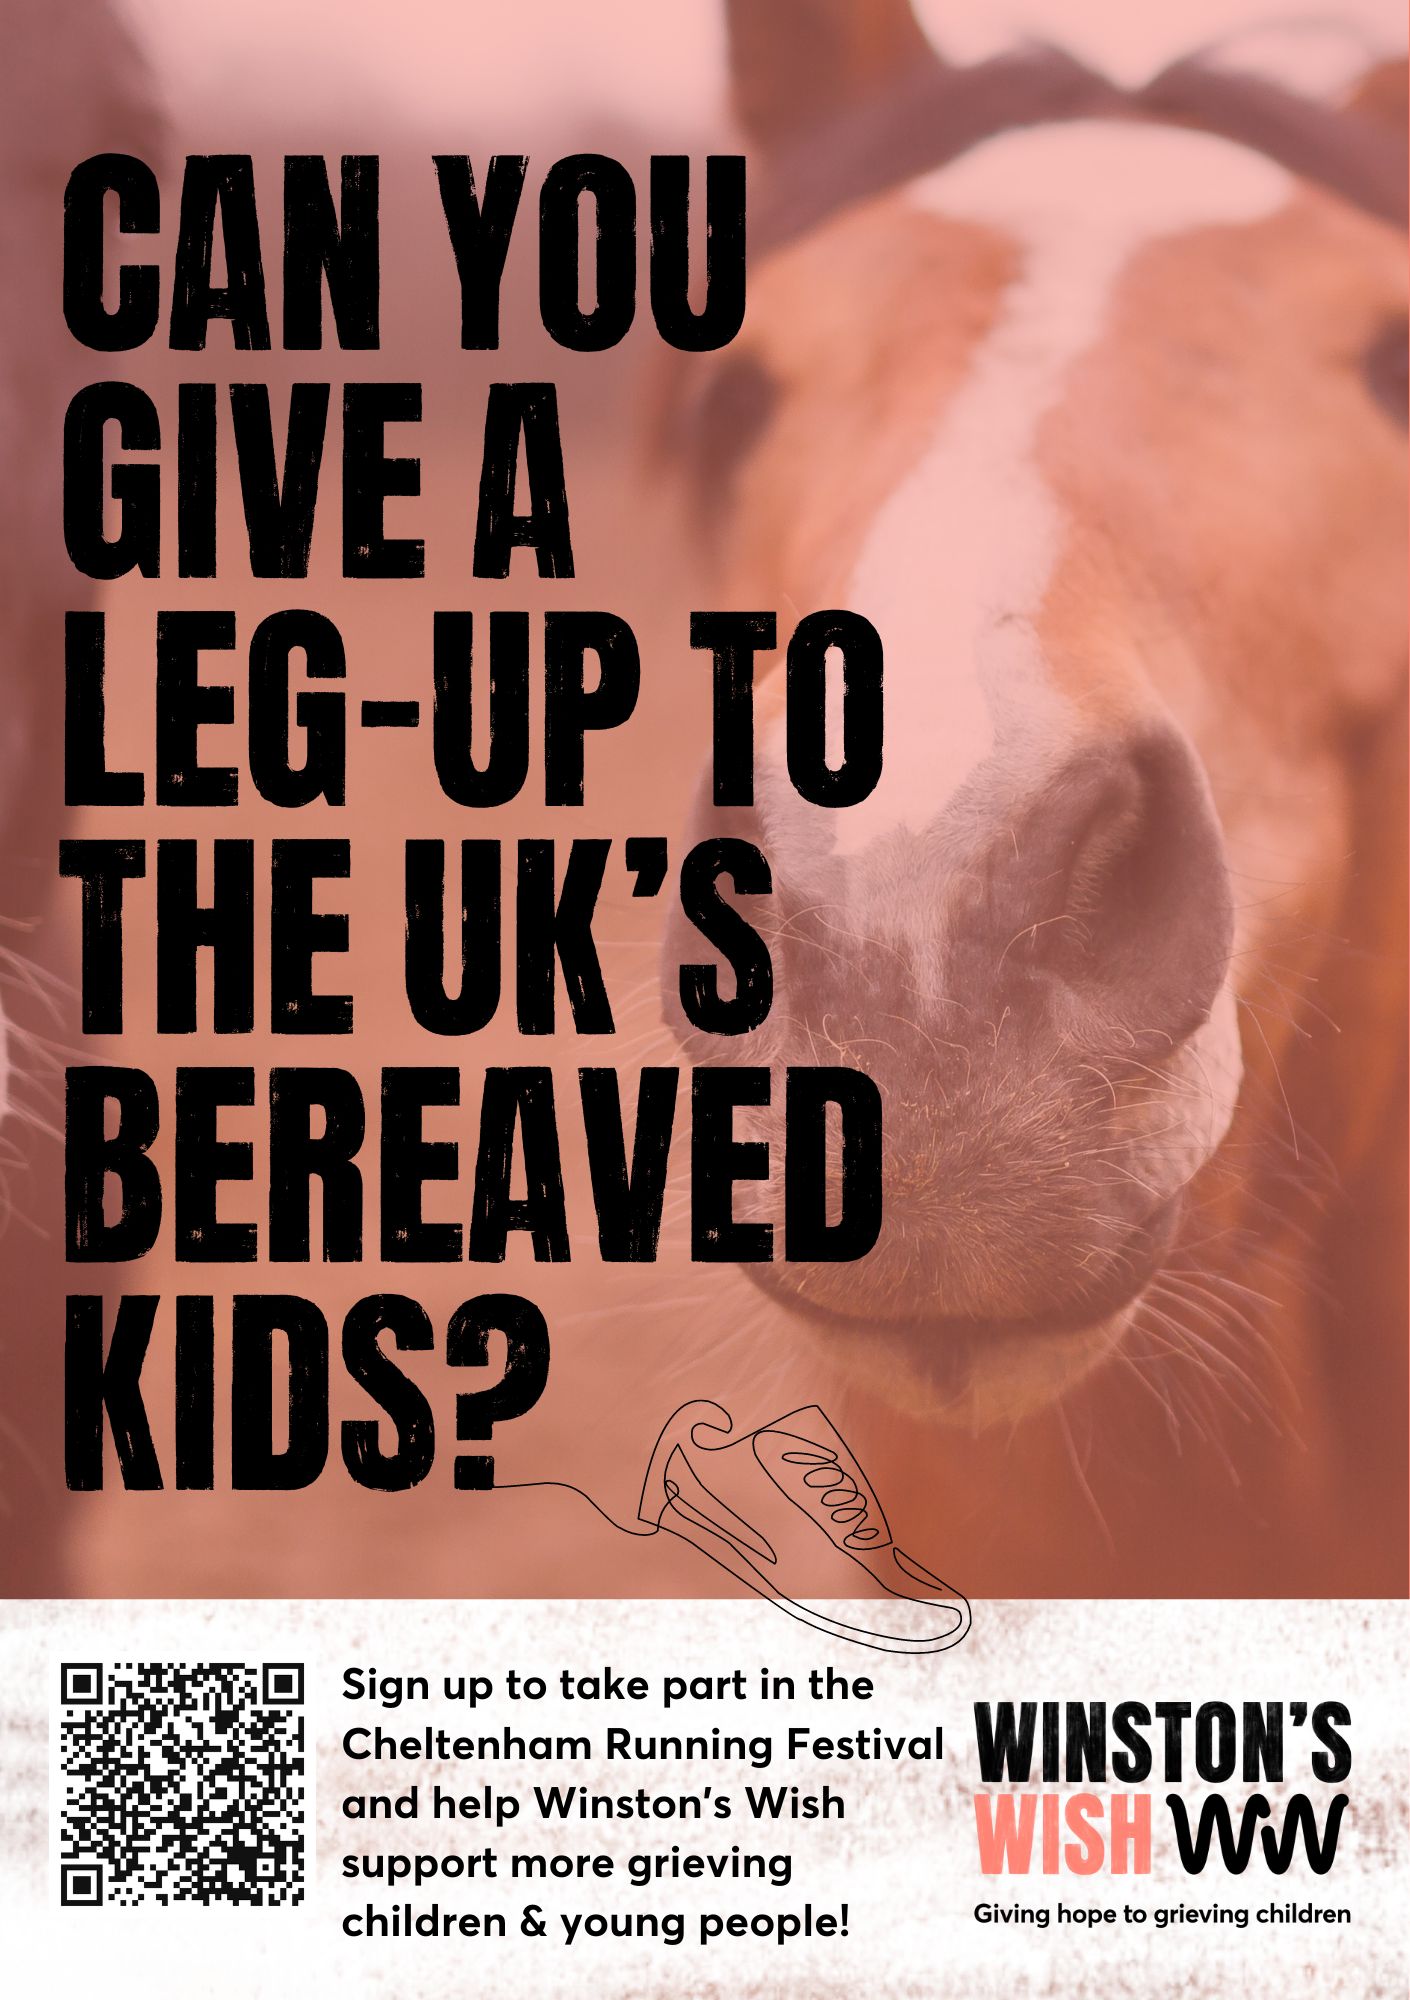 Can you give a leg-up to the UK's bereaved kids?